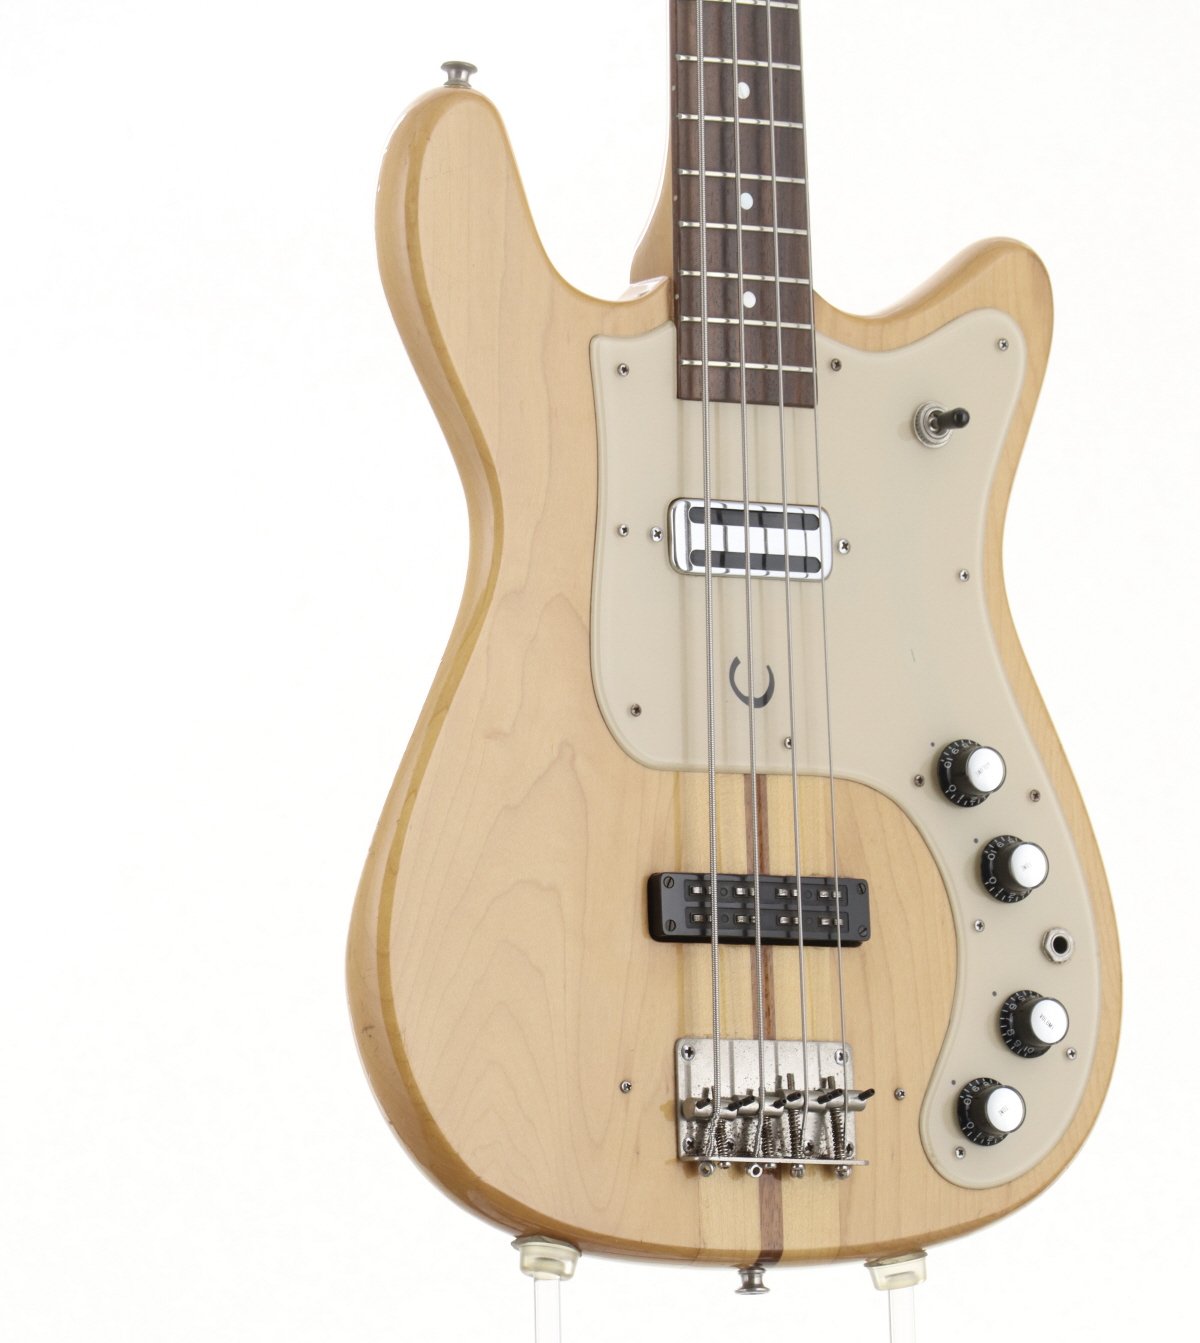 [SN 105062] USED Epiphone / Newport Bass Natural [1970's / Made in Japan][3.75kg] Epiphone Electric Bass [08]